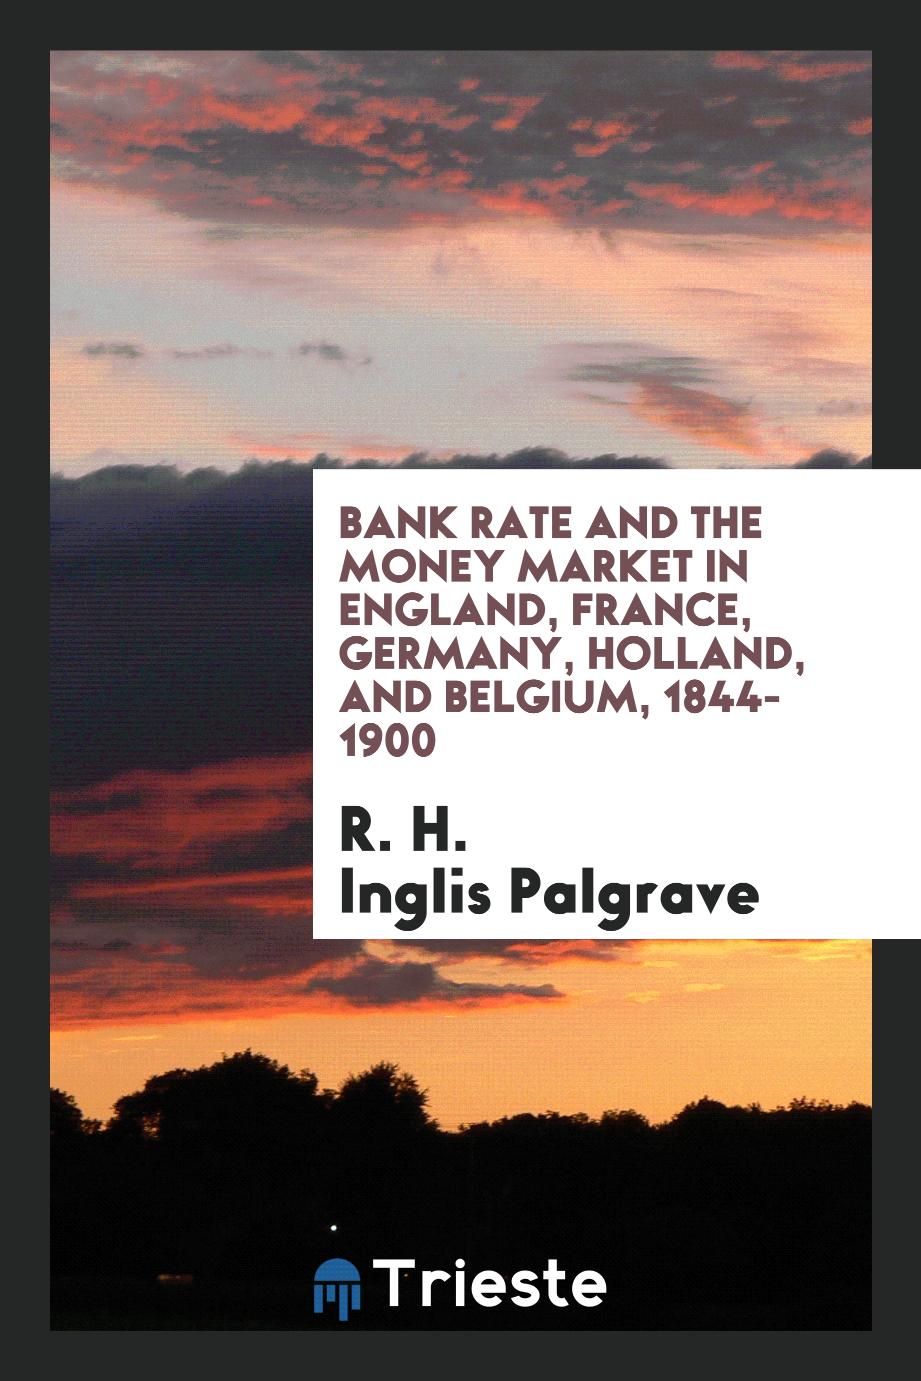 Bank rate and the money market in England, France, Germany, Holland, and Belgium, 1844-1900